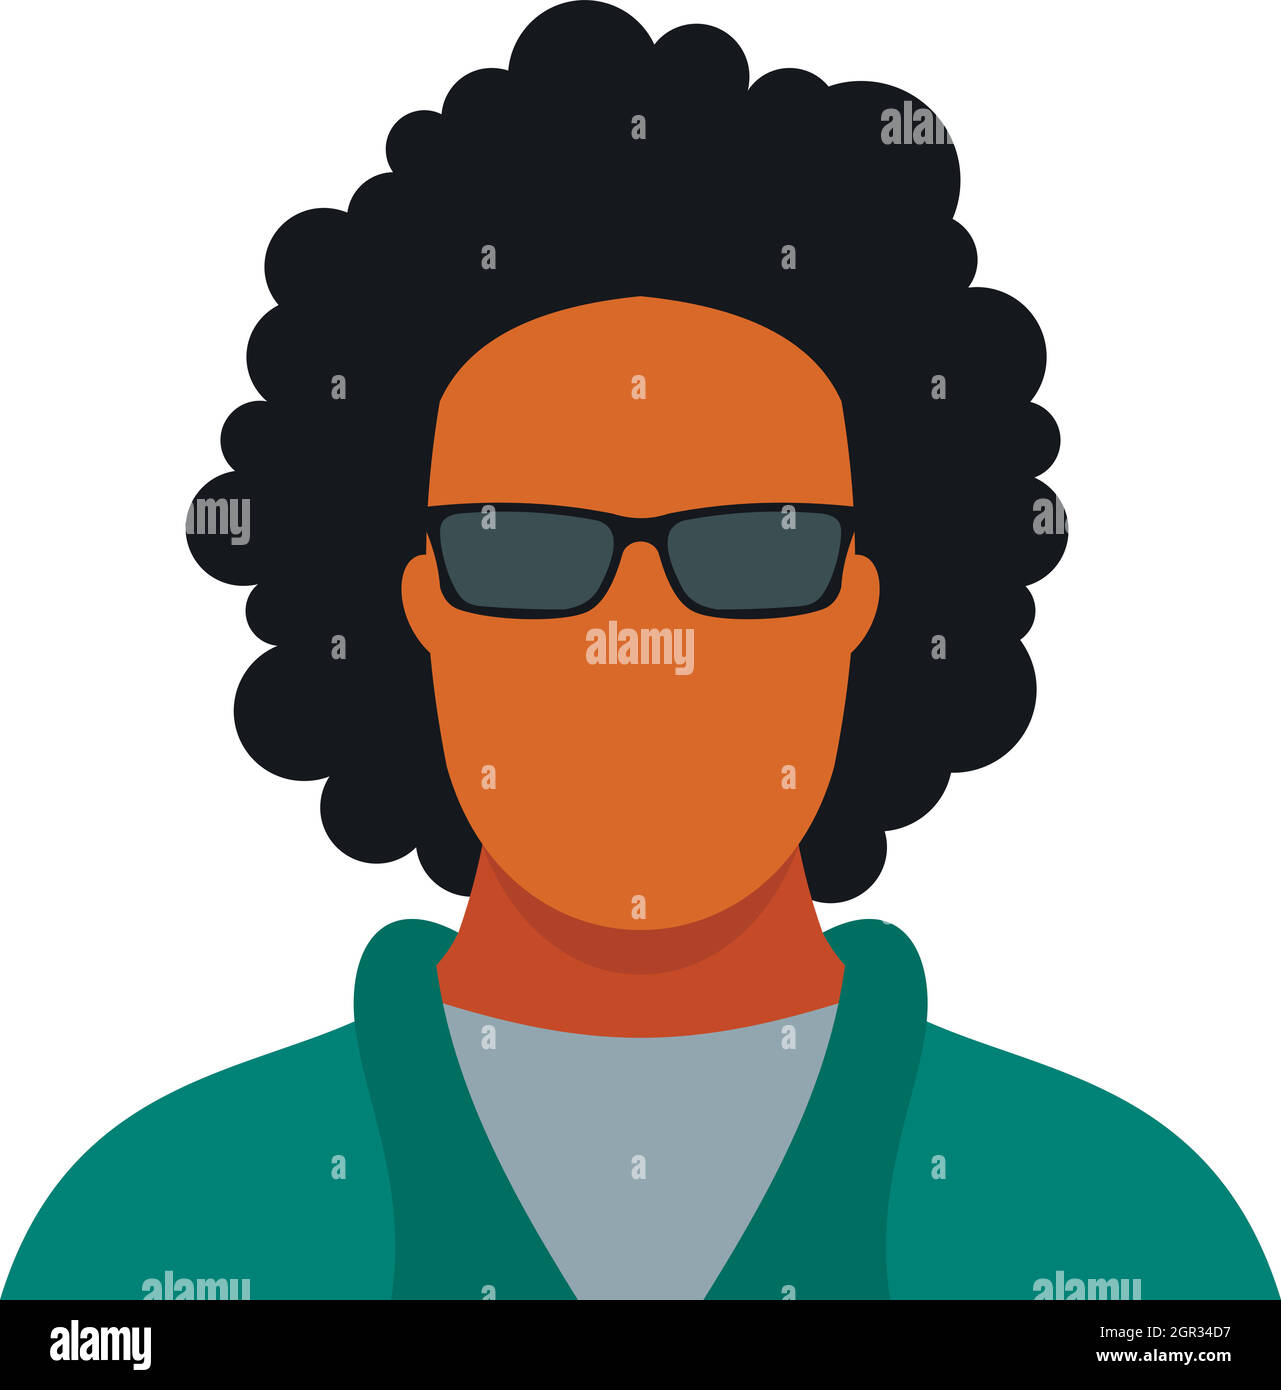 Man with glasses icon in flat style Stock Vector